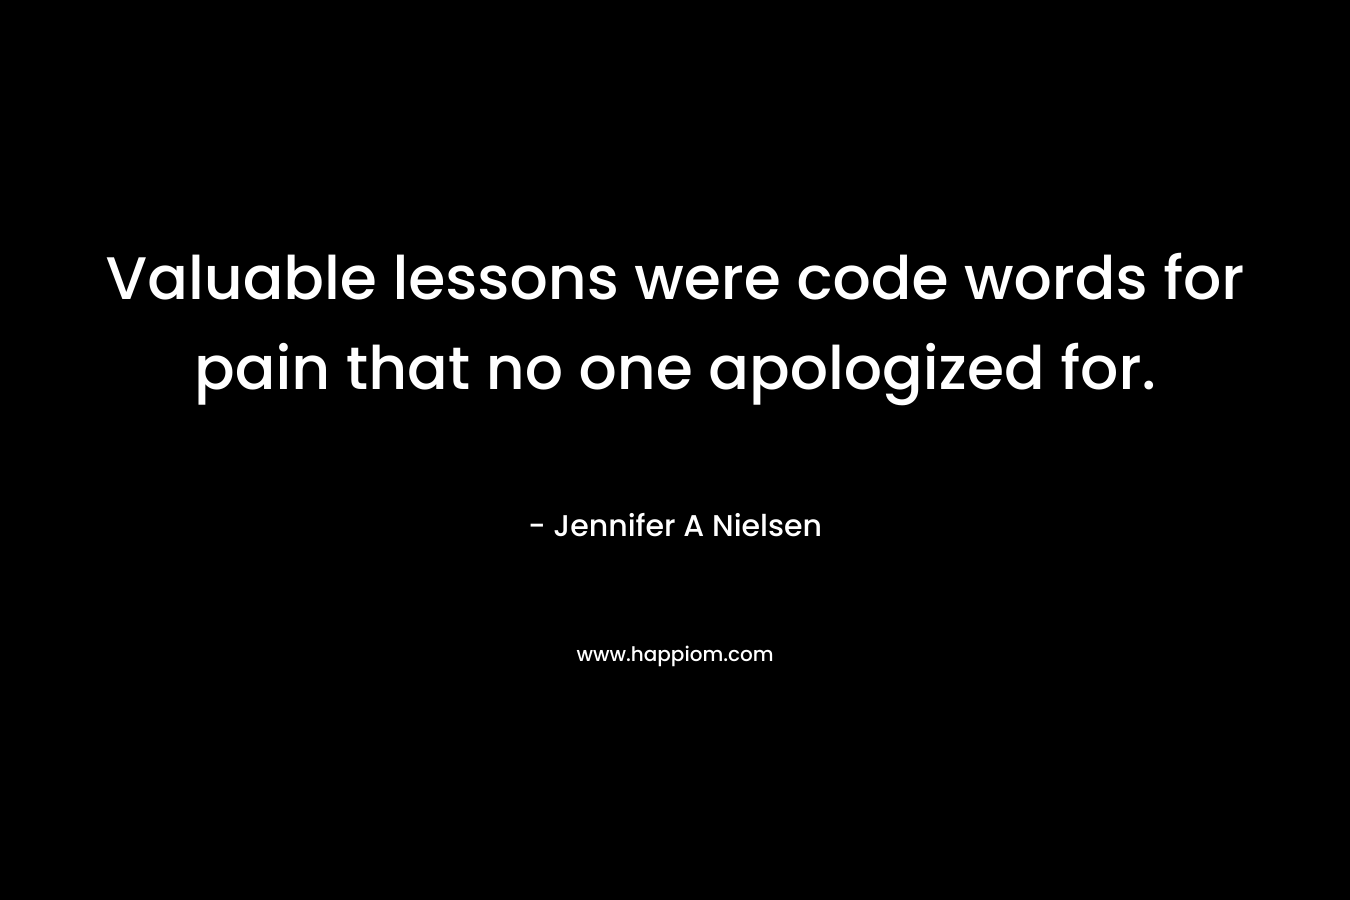 Valuable lessons were code words for pain that no one apologized for.